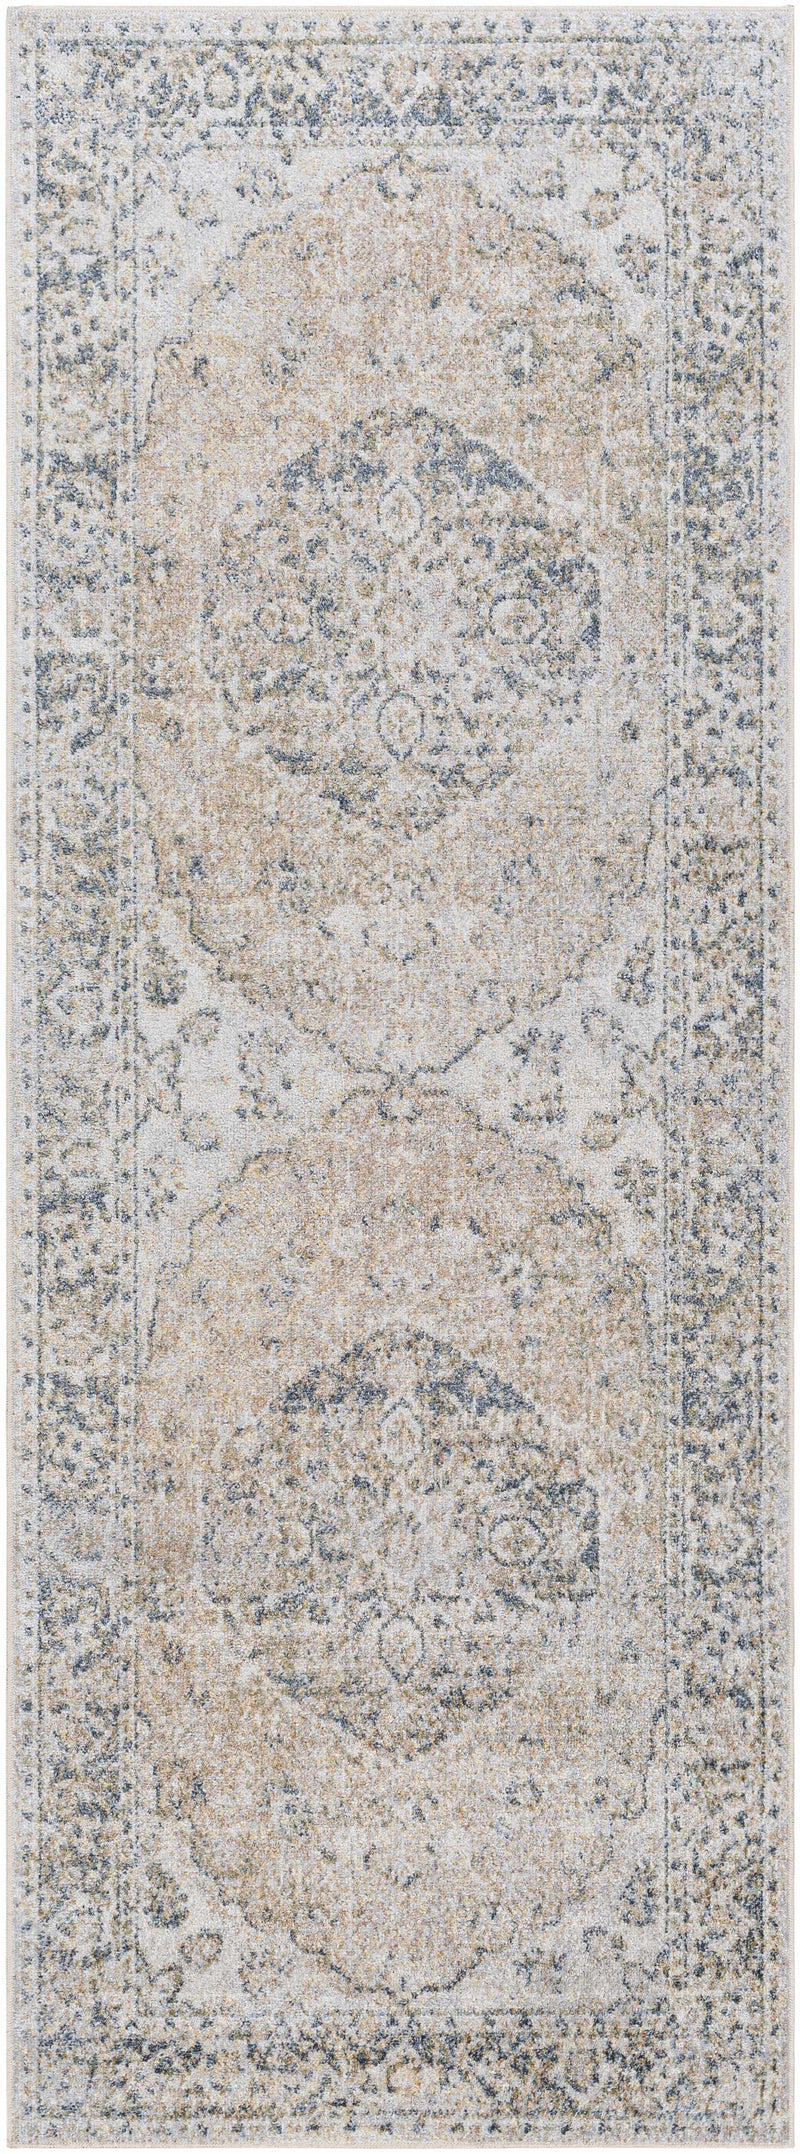 Traditional Medallion design woven Beige, Ivory and Charcoal Washable Rug